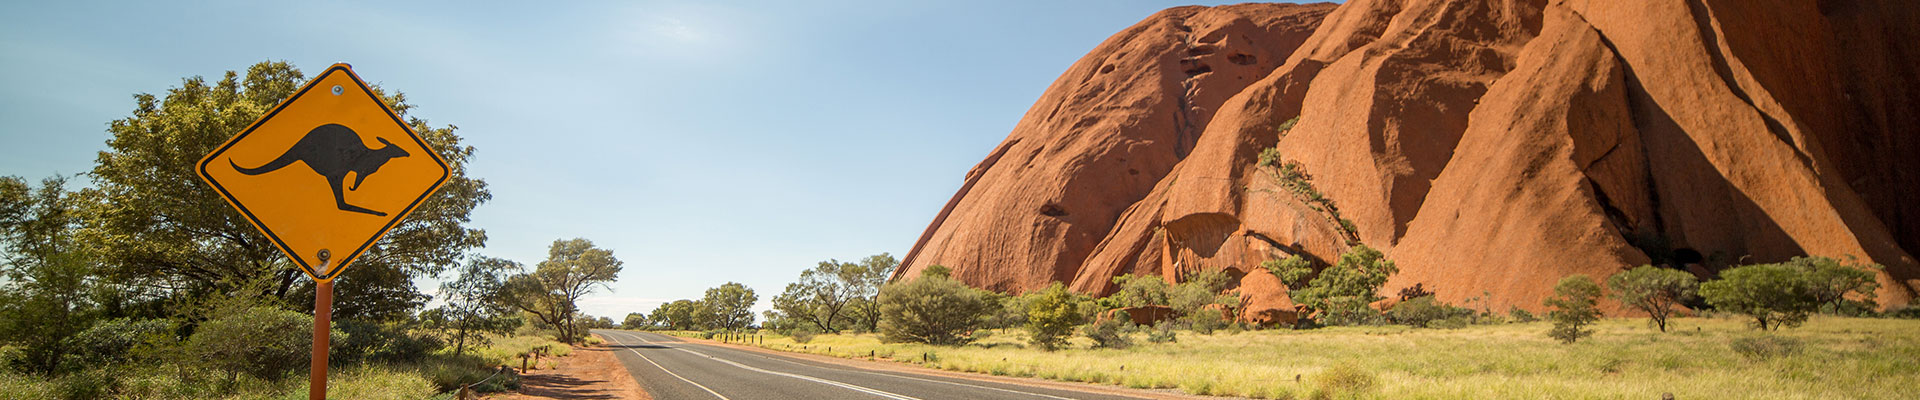 Fantasy RV Tours: 7 Day Real Outback Add-on (07OROP-050125)